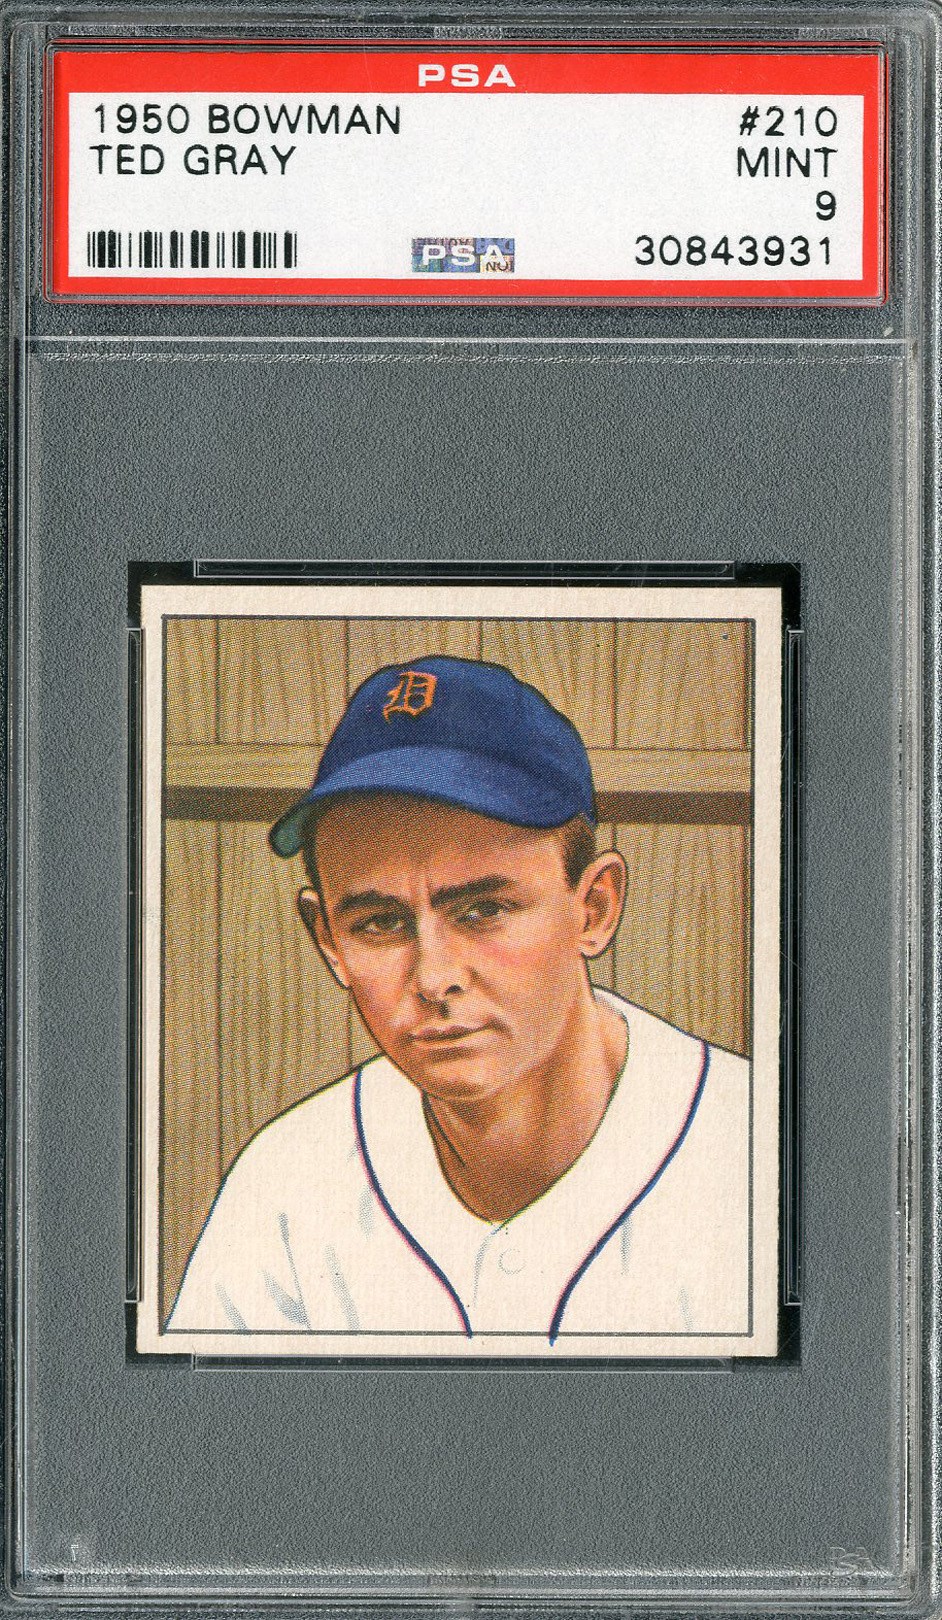 Baseball and Trading Cards - 1950 Bowman #210 Ted Gray PSA MINT 9